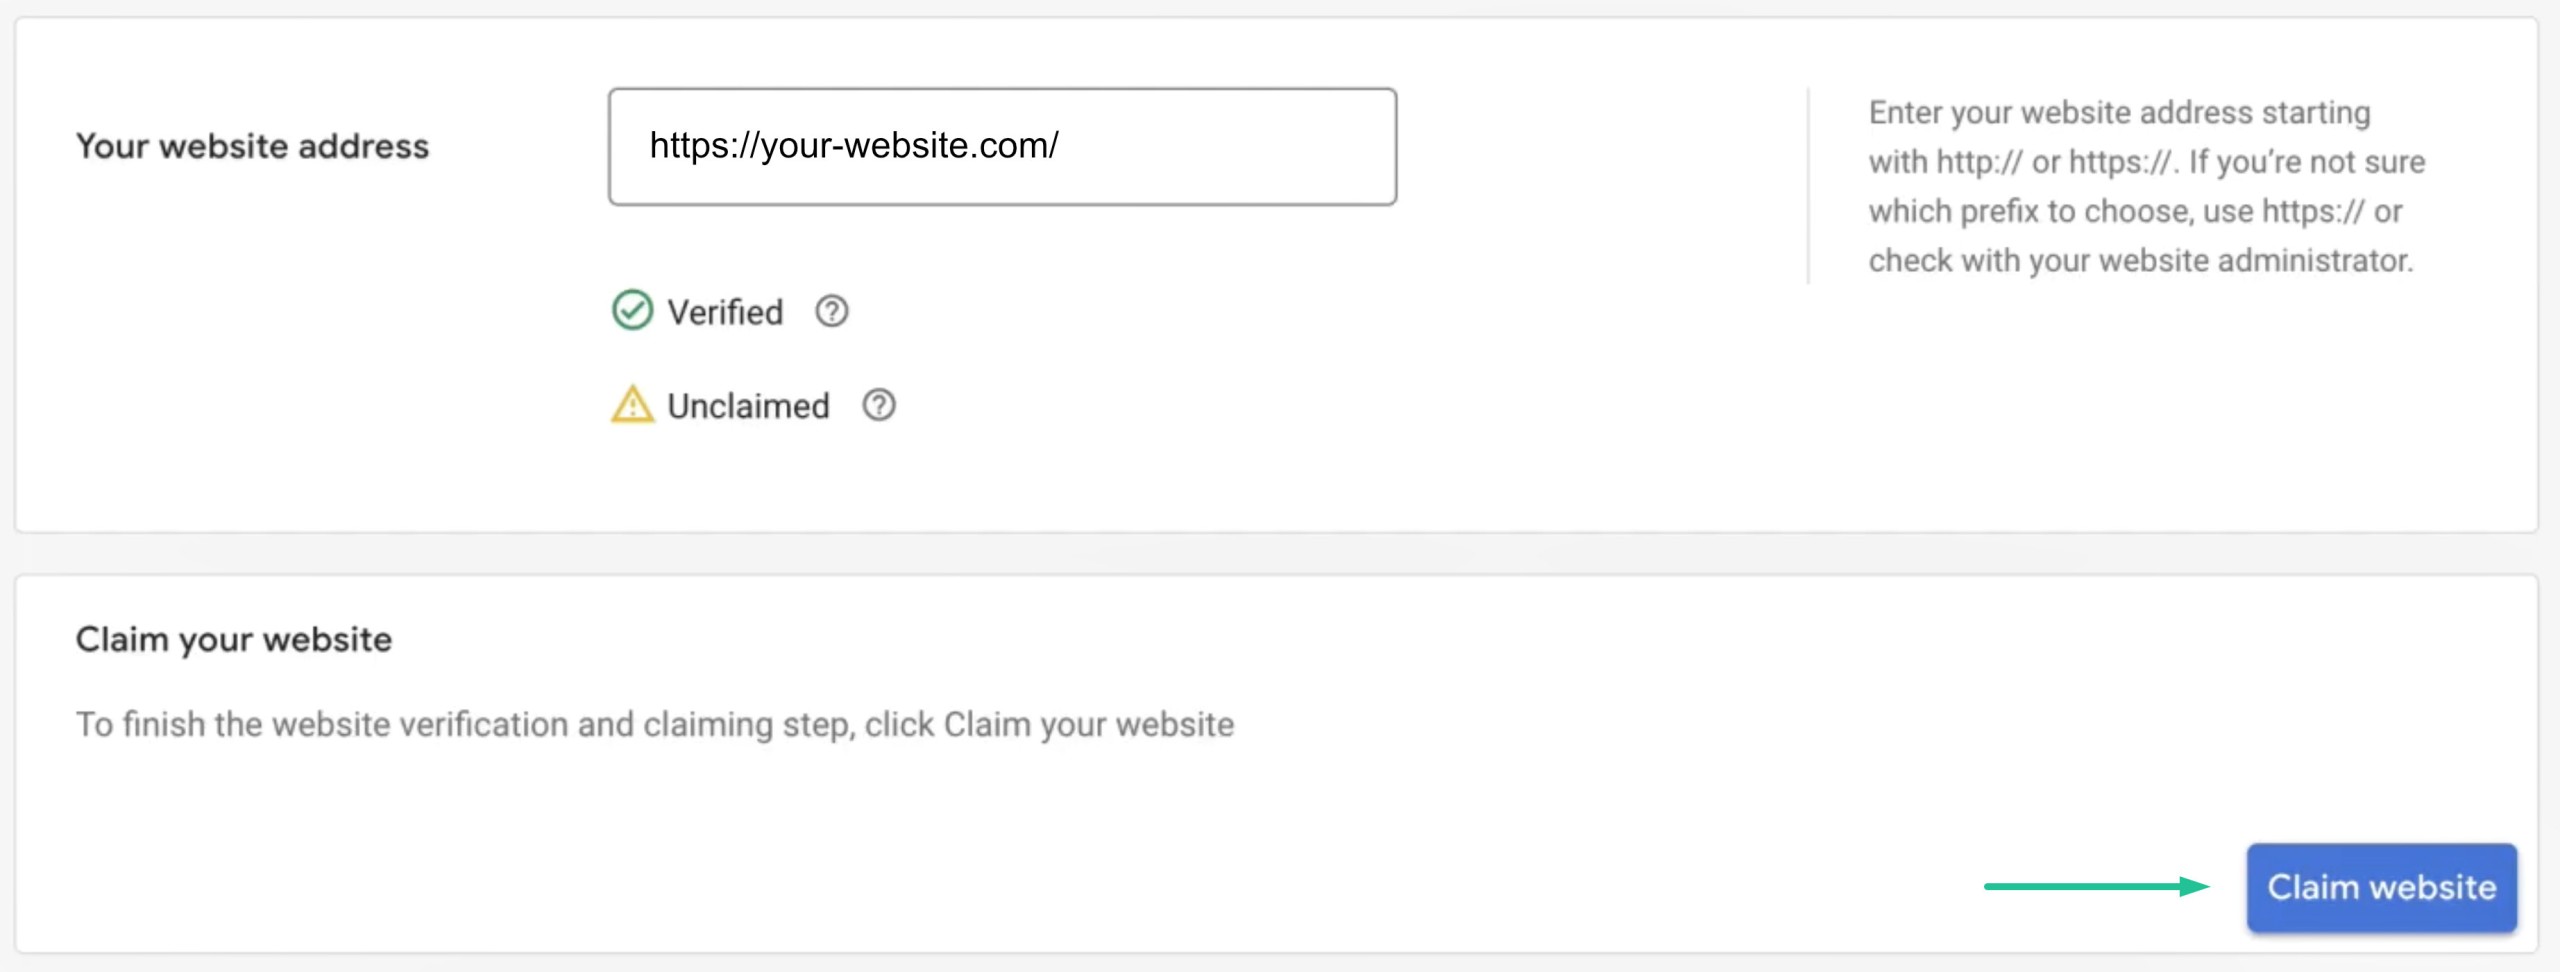 Screen shot of the final step in claiming your website in Google Merchant Center interface